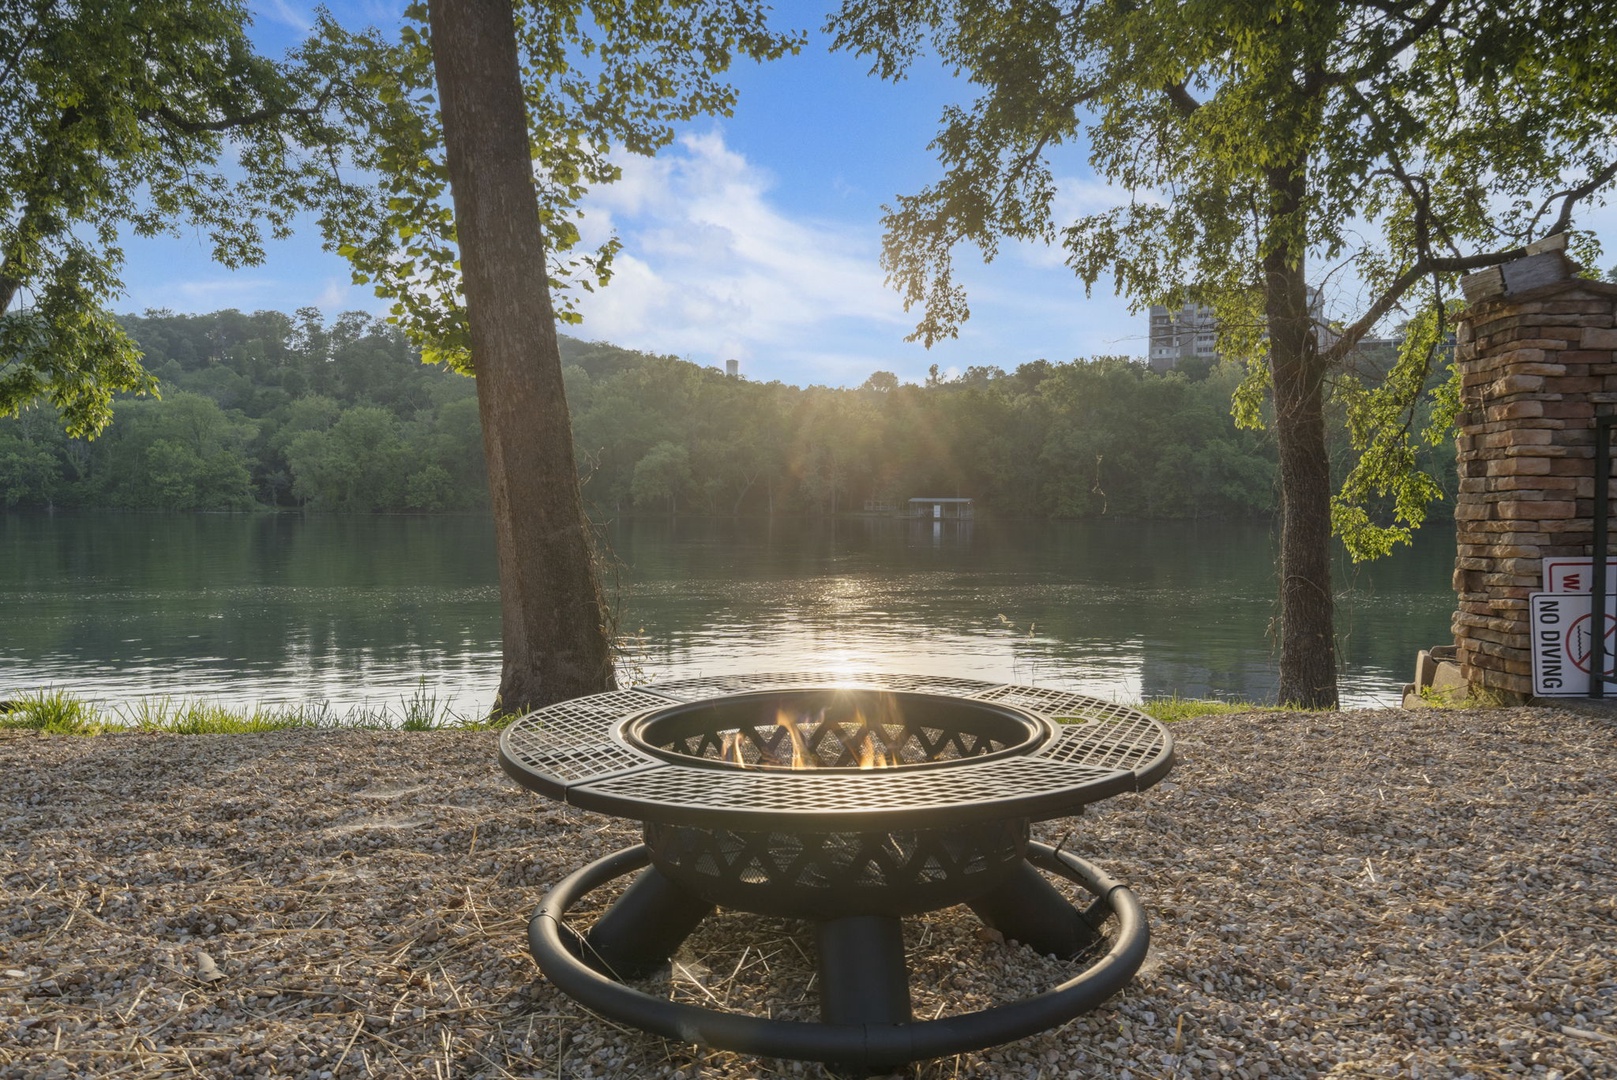 Enjoy tranquil lake views during your visit to Branson from the communal firepit